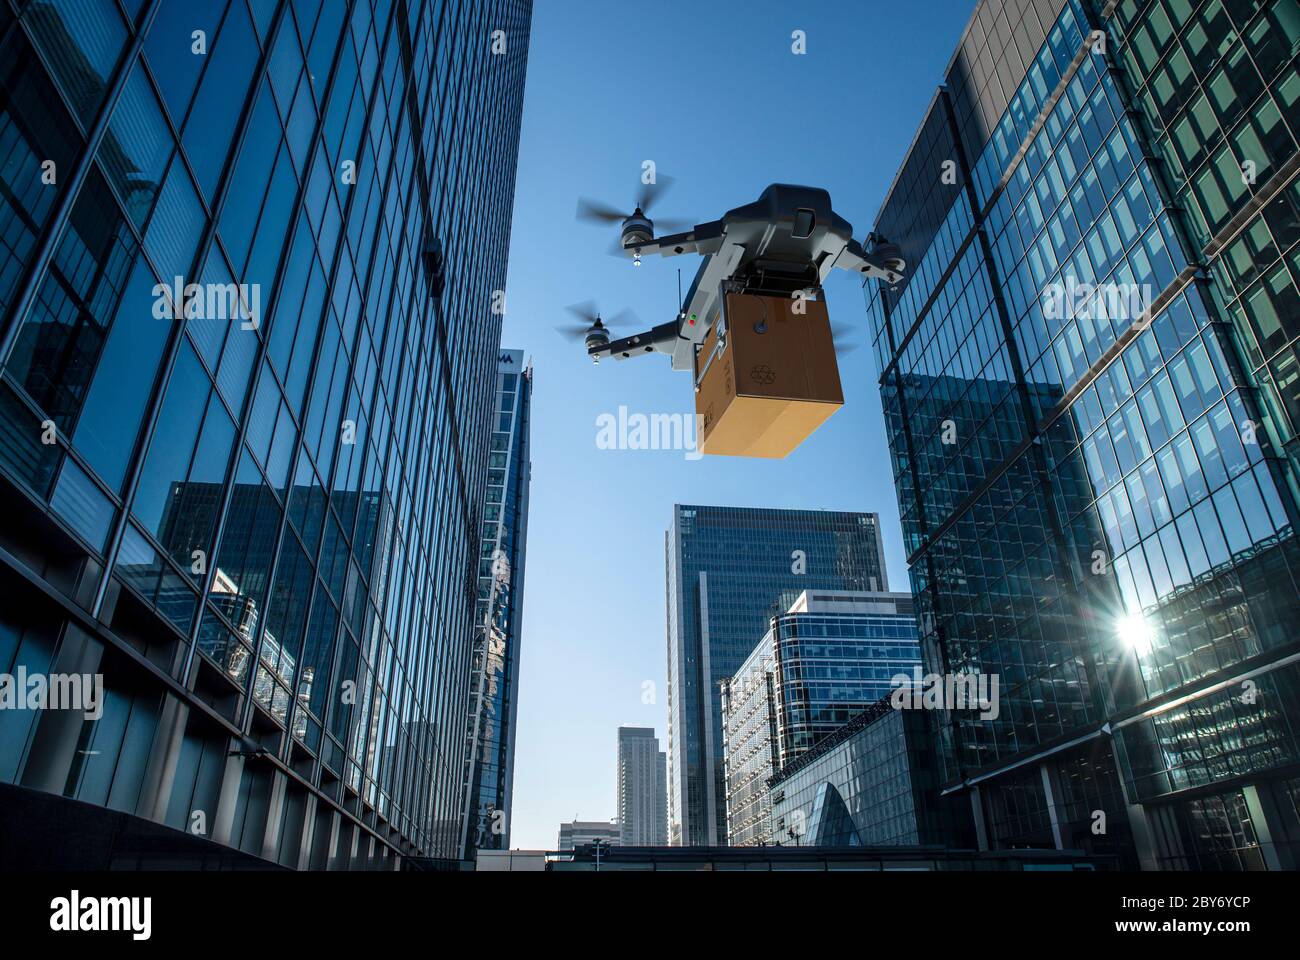 Drone delivering package between highrise buildings, London, UK Stock Photo